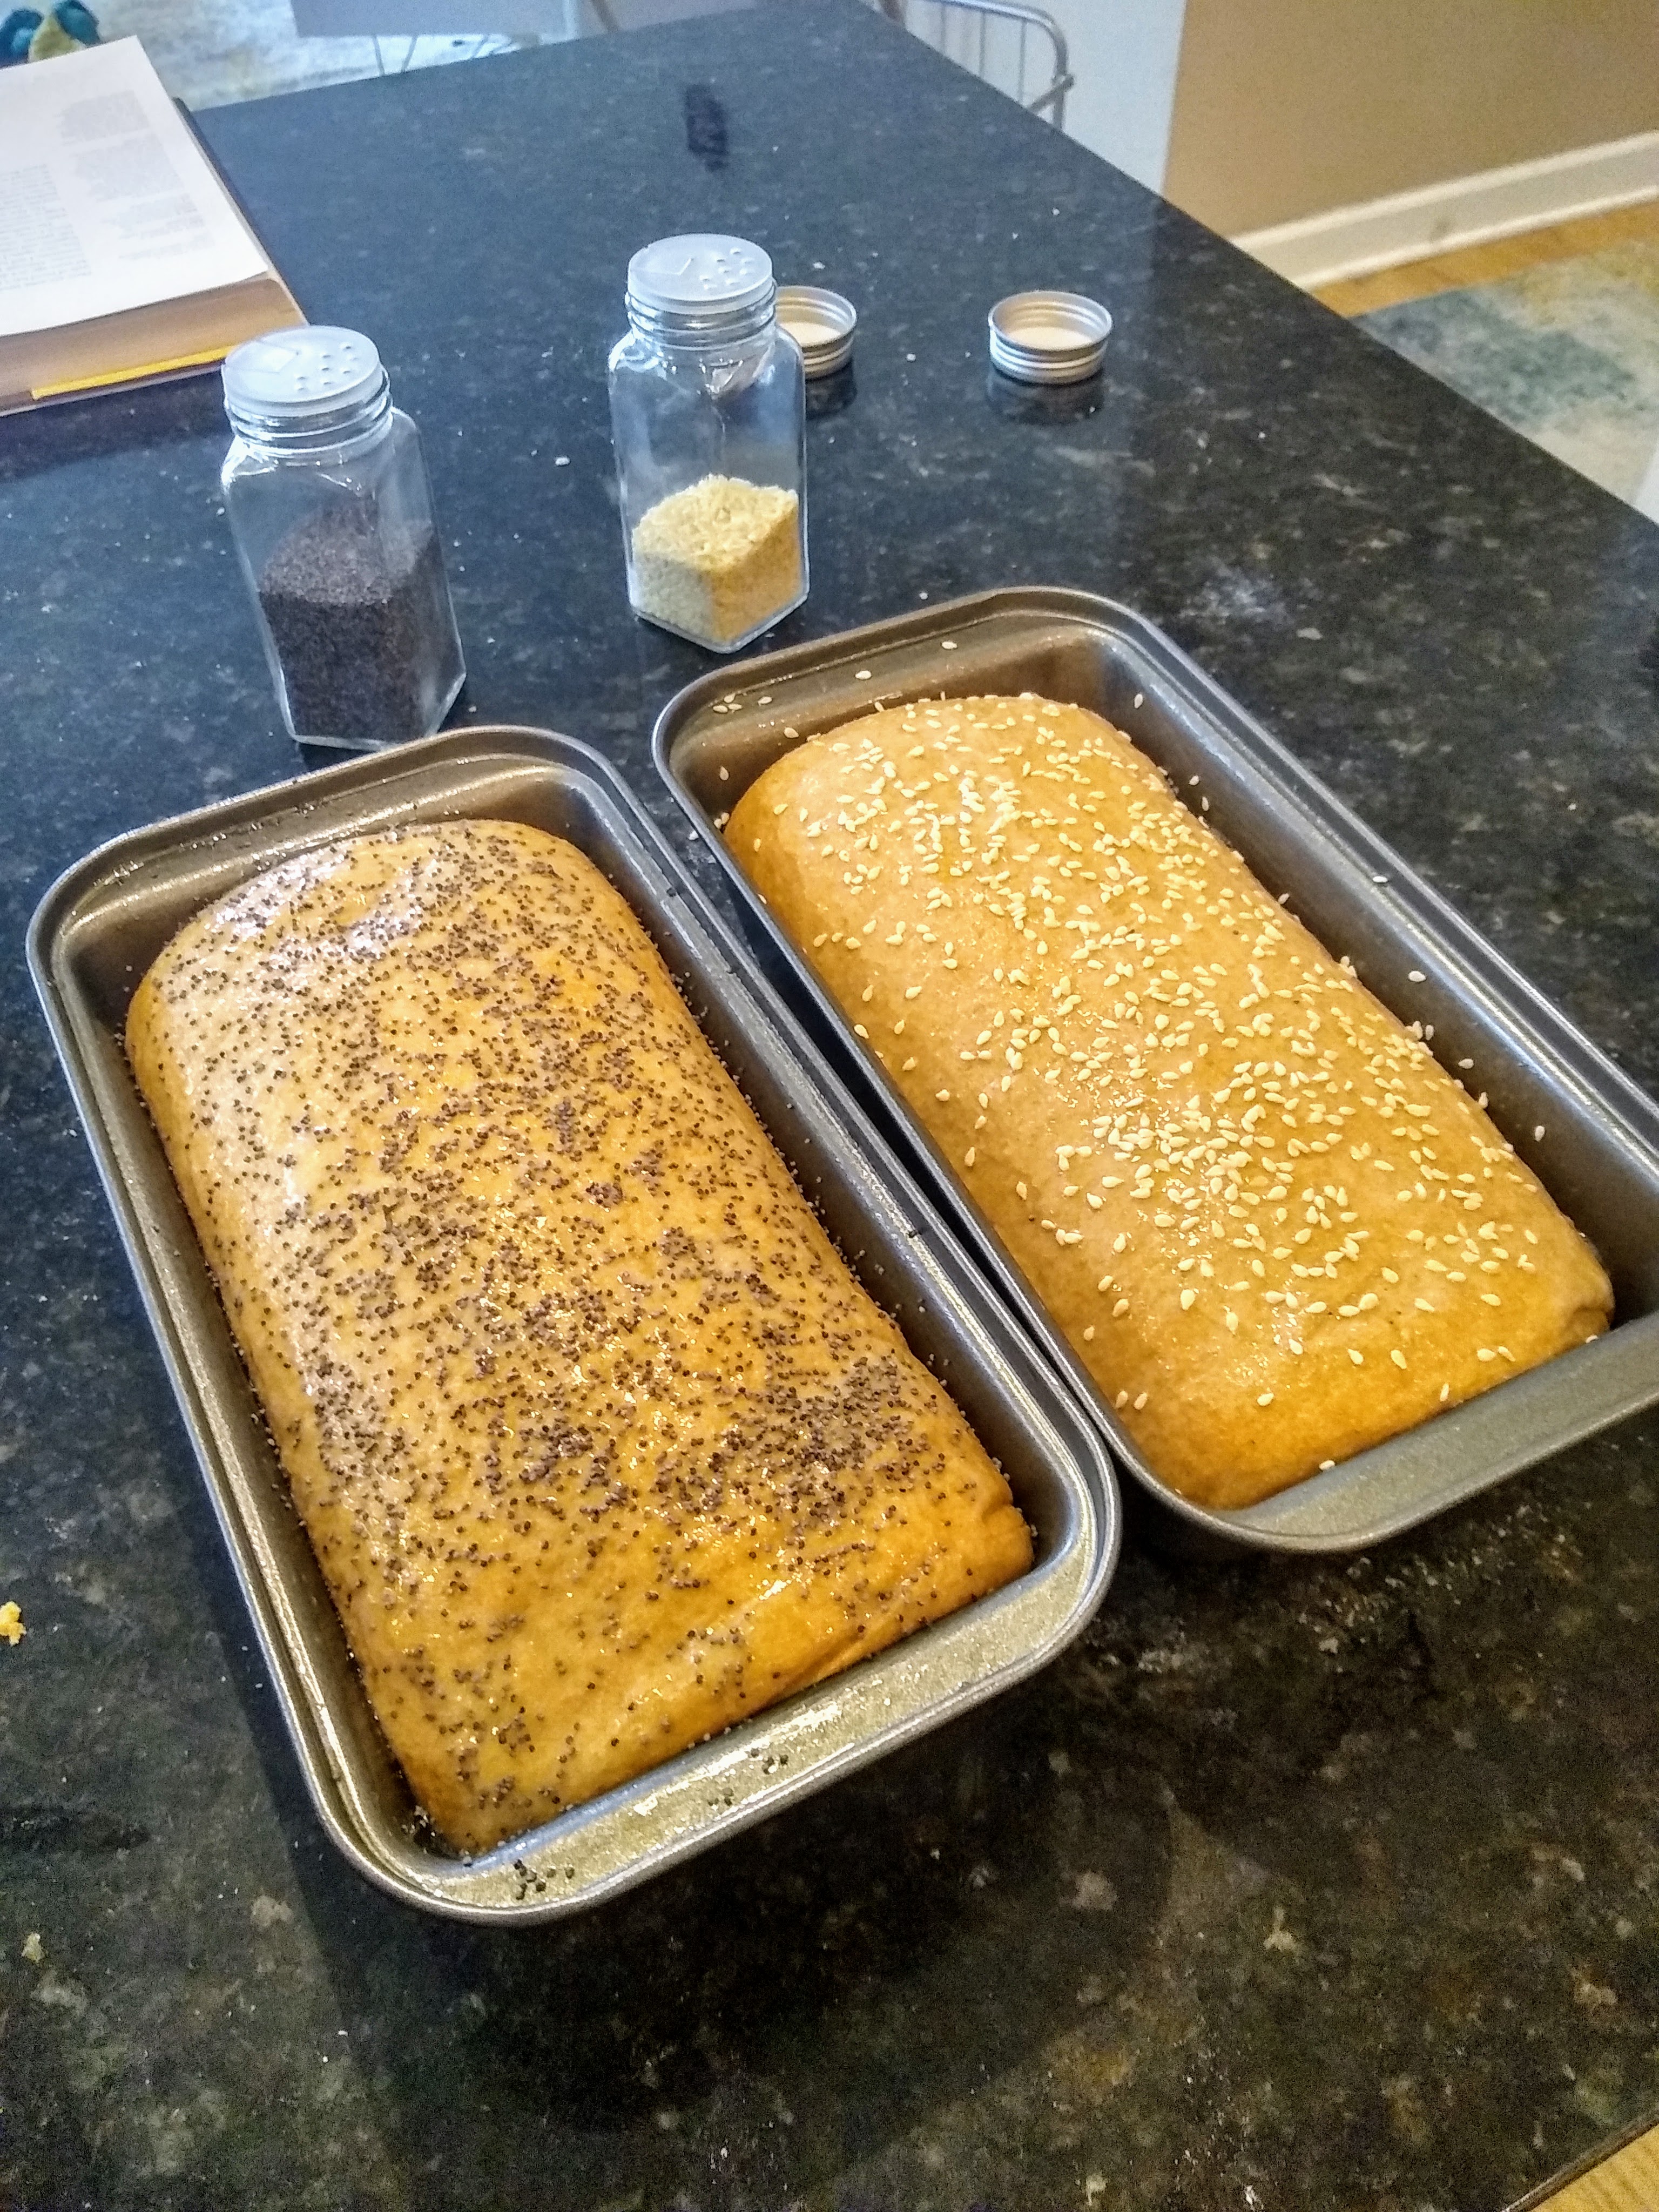 Proofed loaves of whole wheat bread.